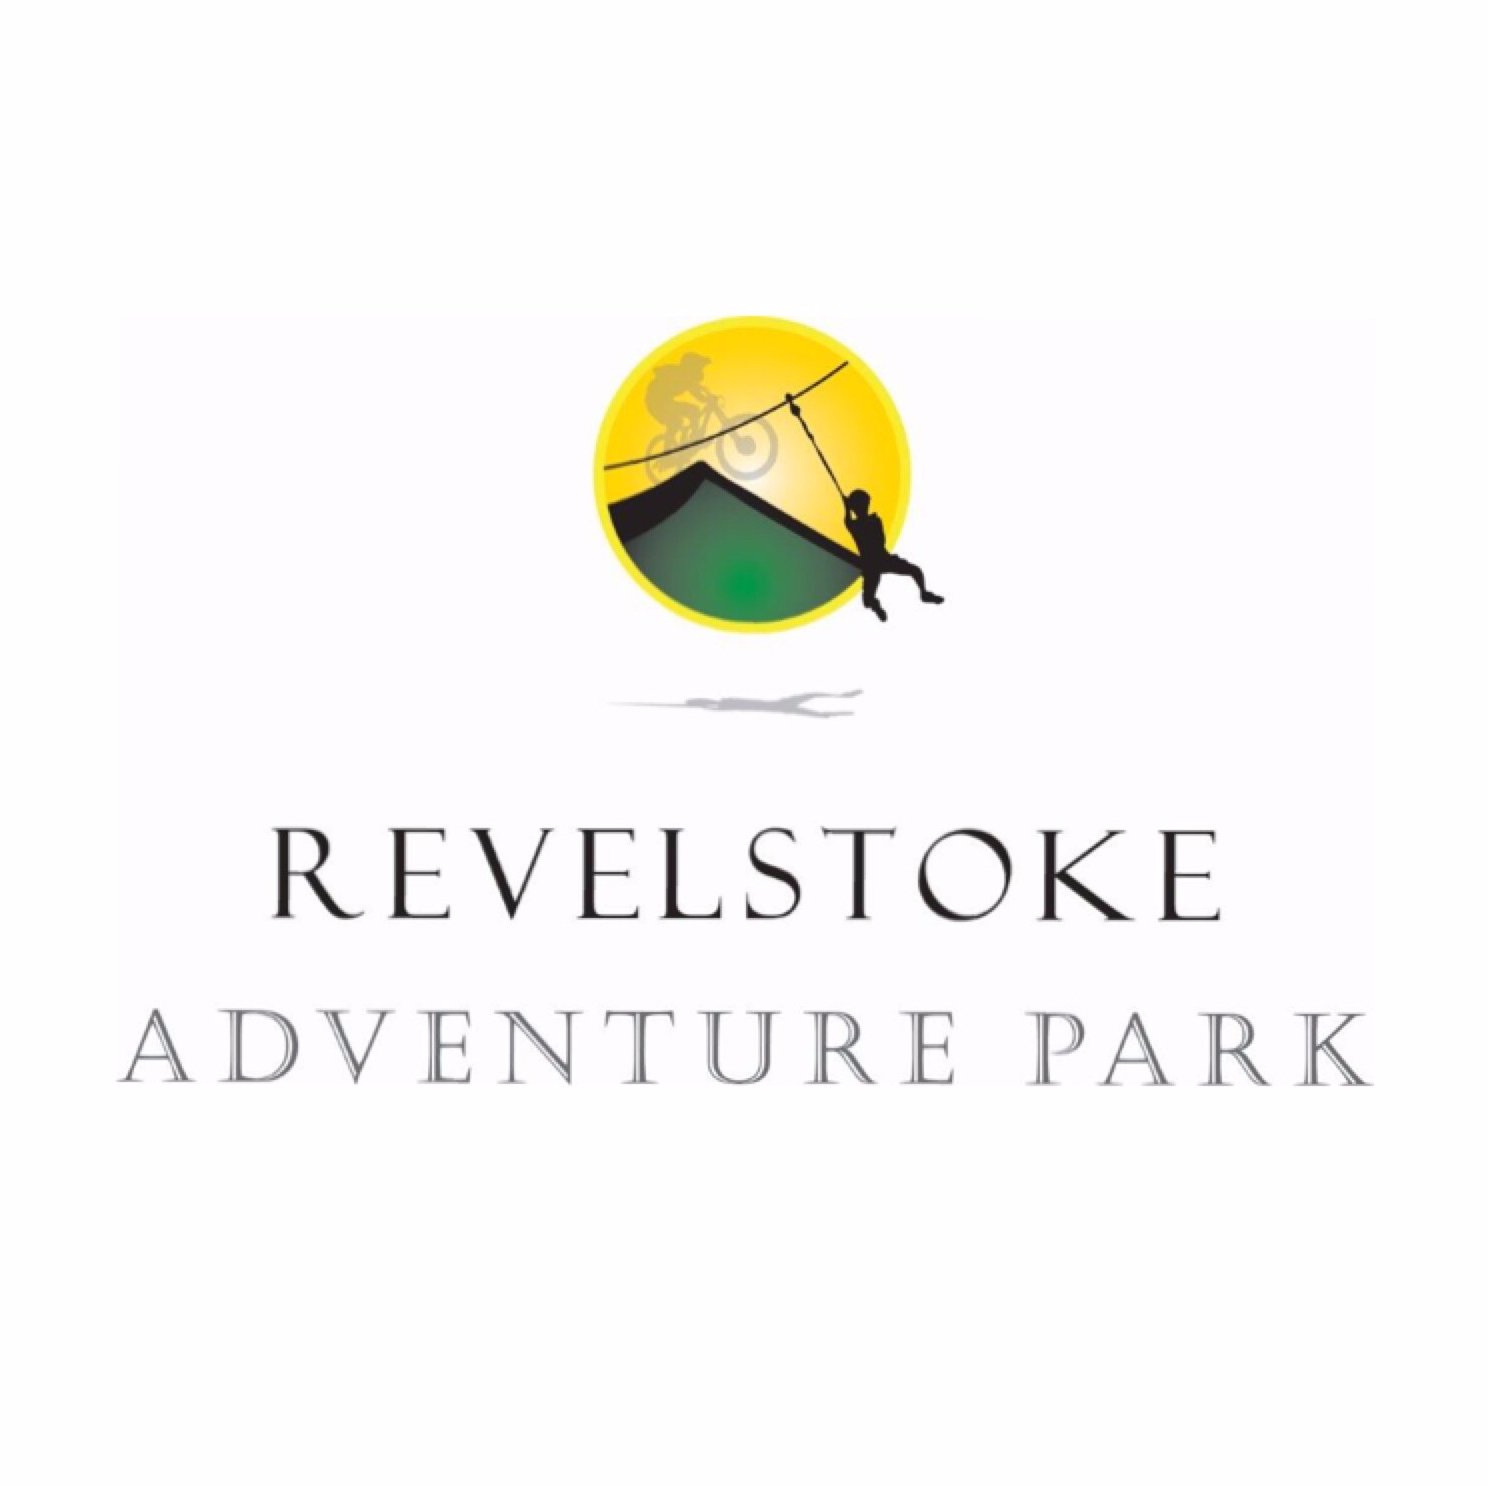 Located in the Canadian Rocky Mountains, the Revelstoke Adventure Park is a world class summer adventure destination.